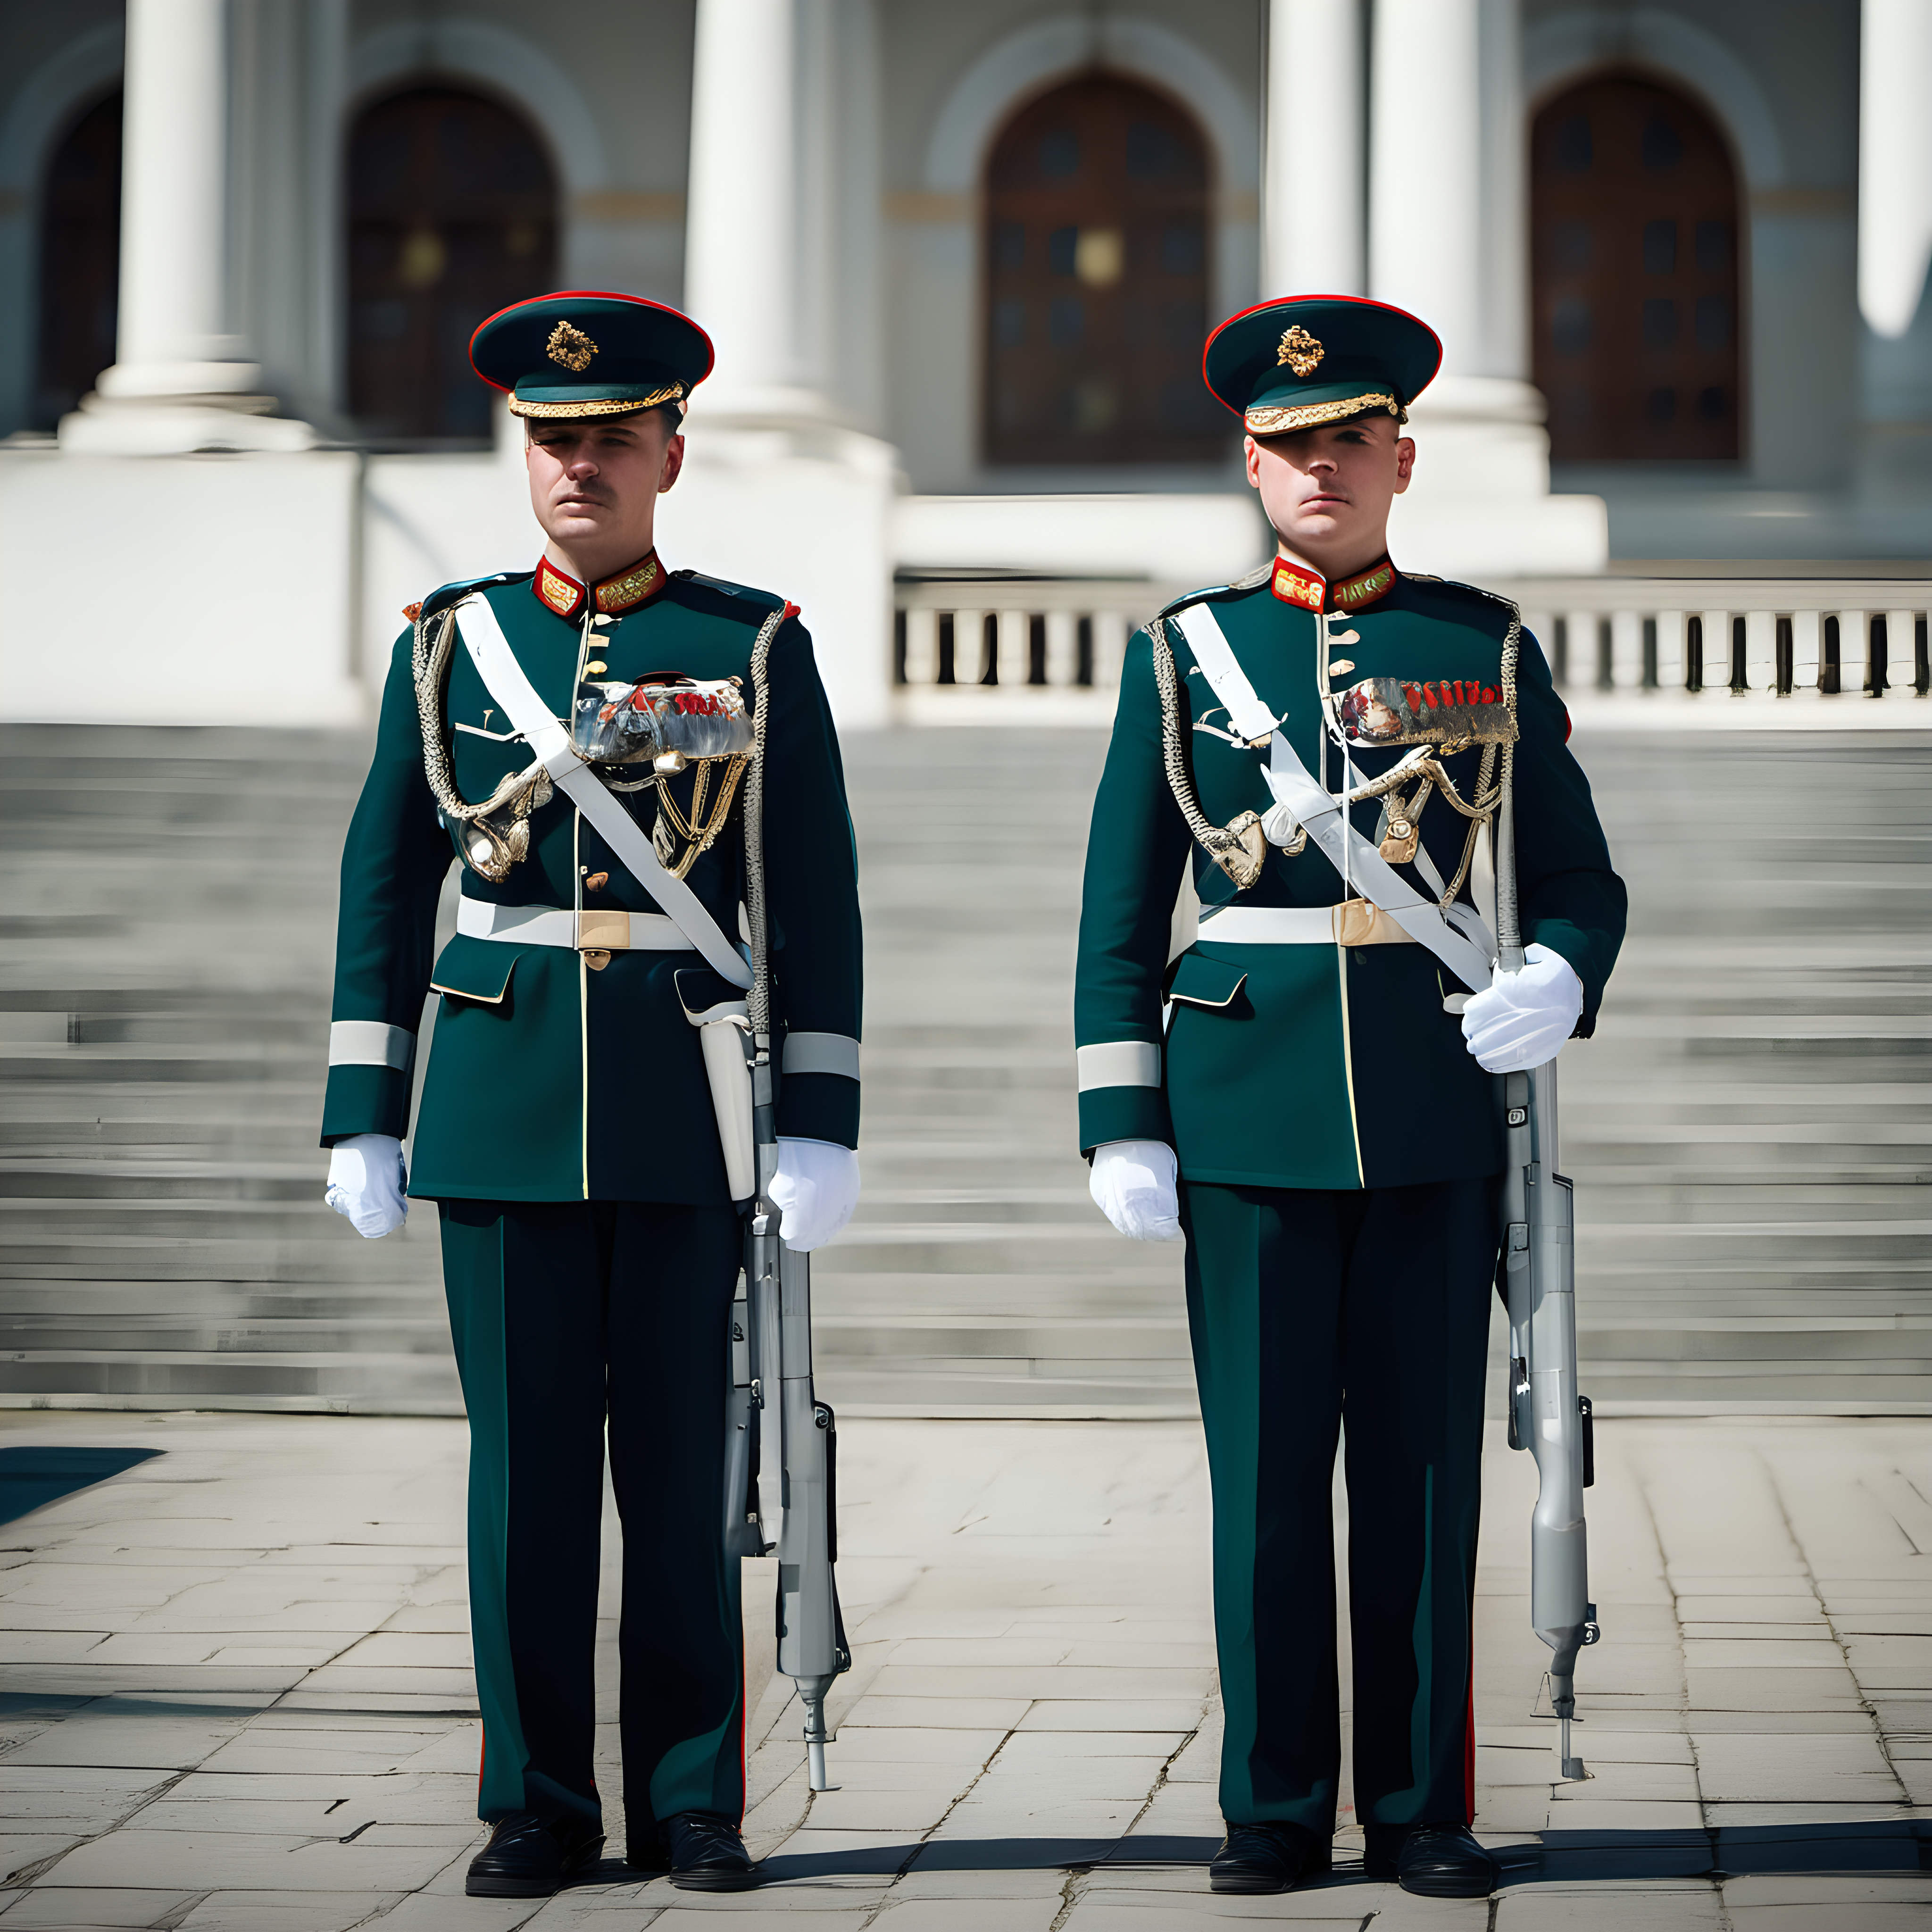 Two Russian armed guards dressed in military uniforms